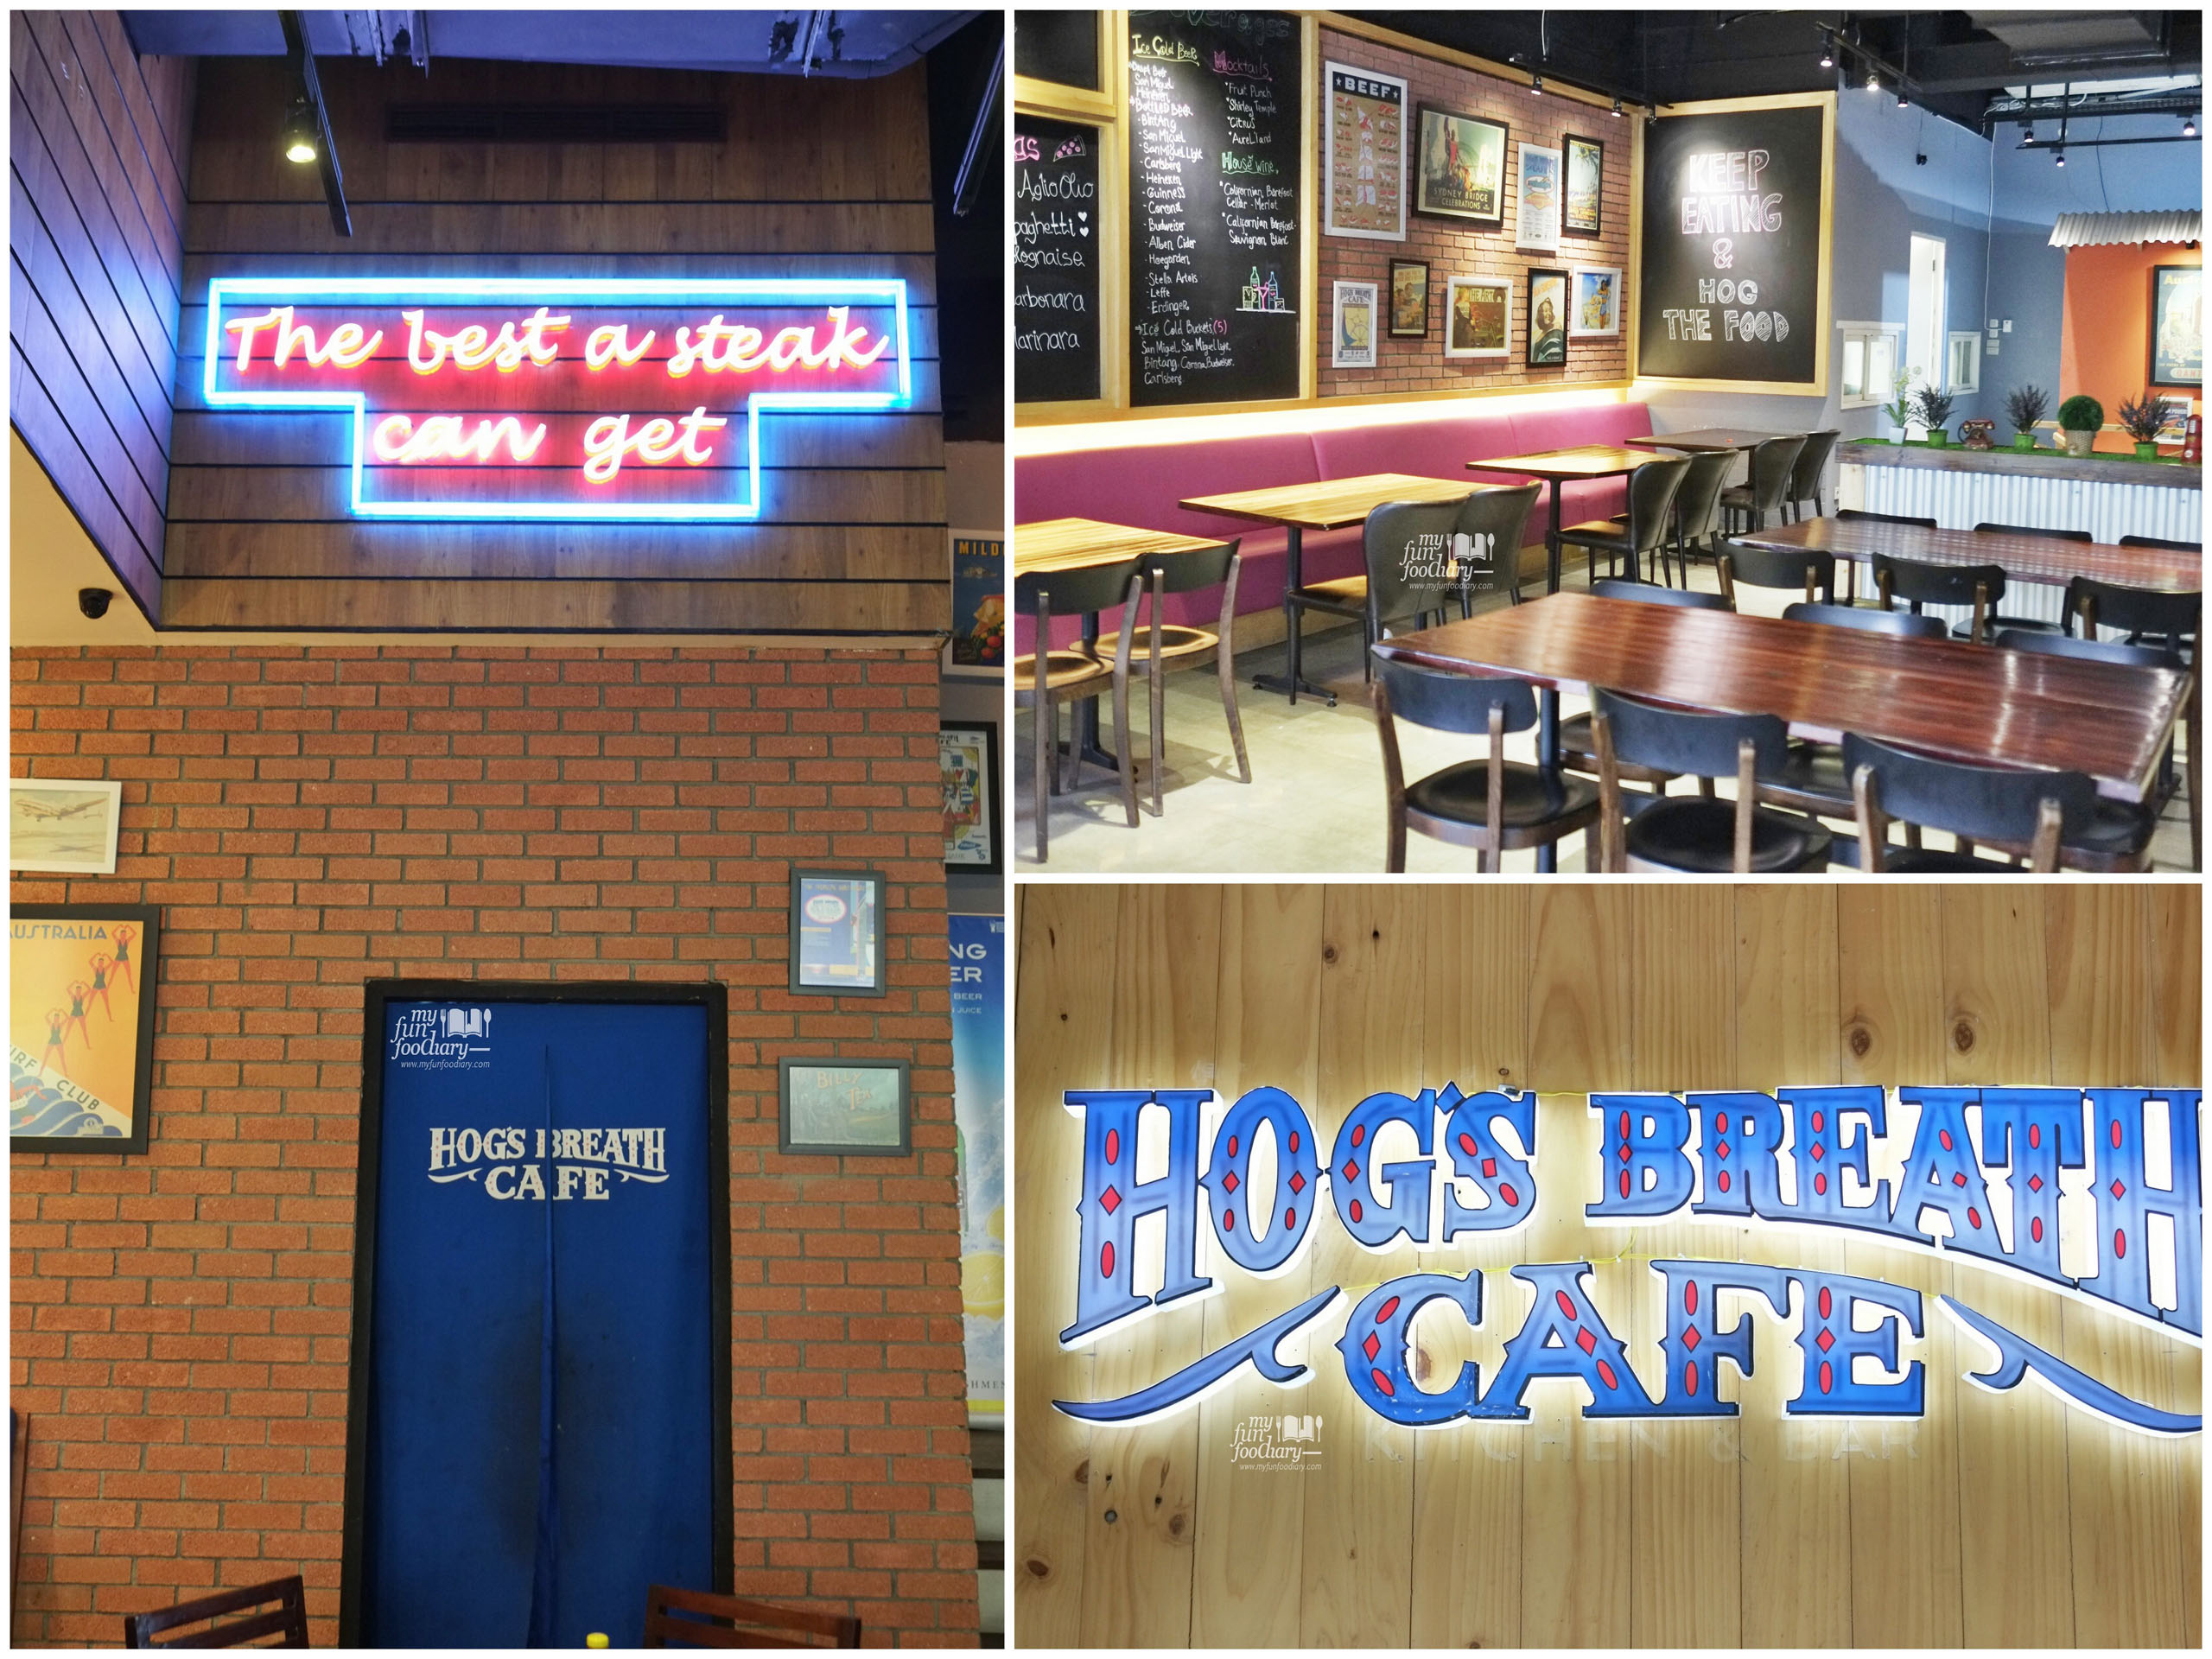 Second Floor ambience at Hogs Breath Cafe by Myfunfoodiary